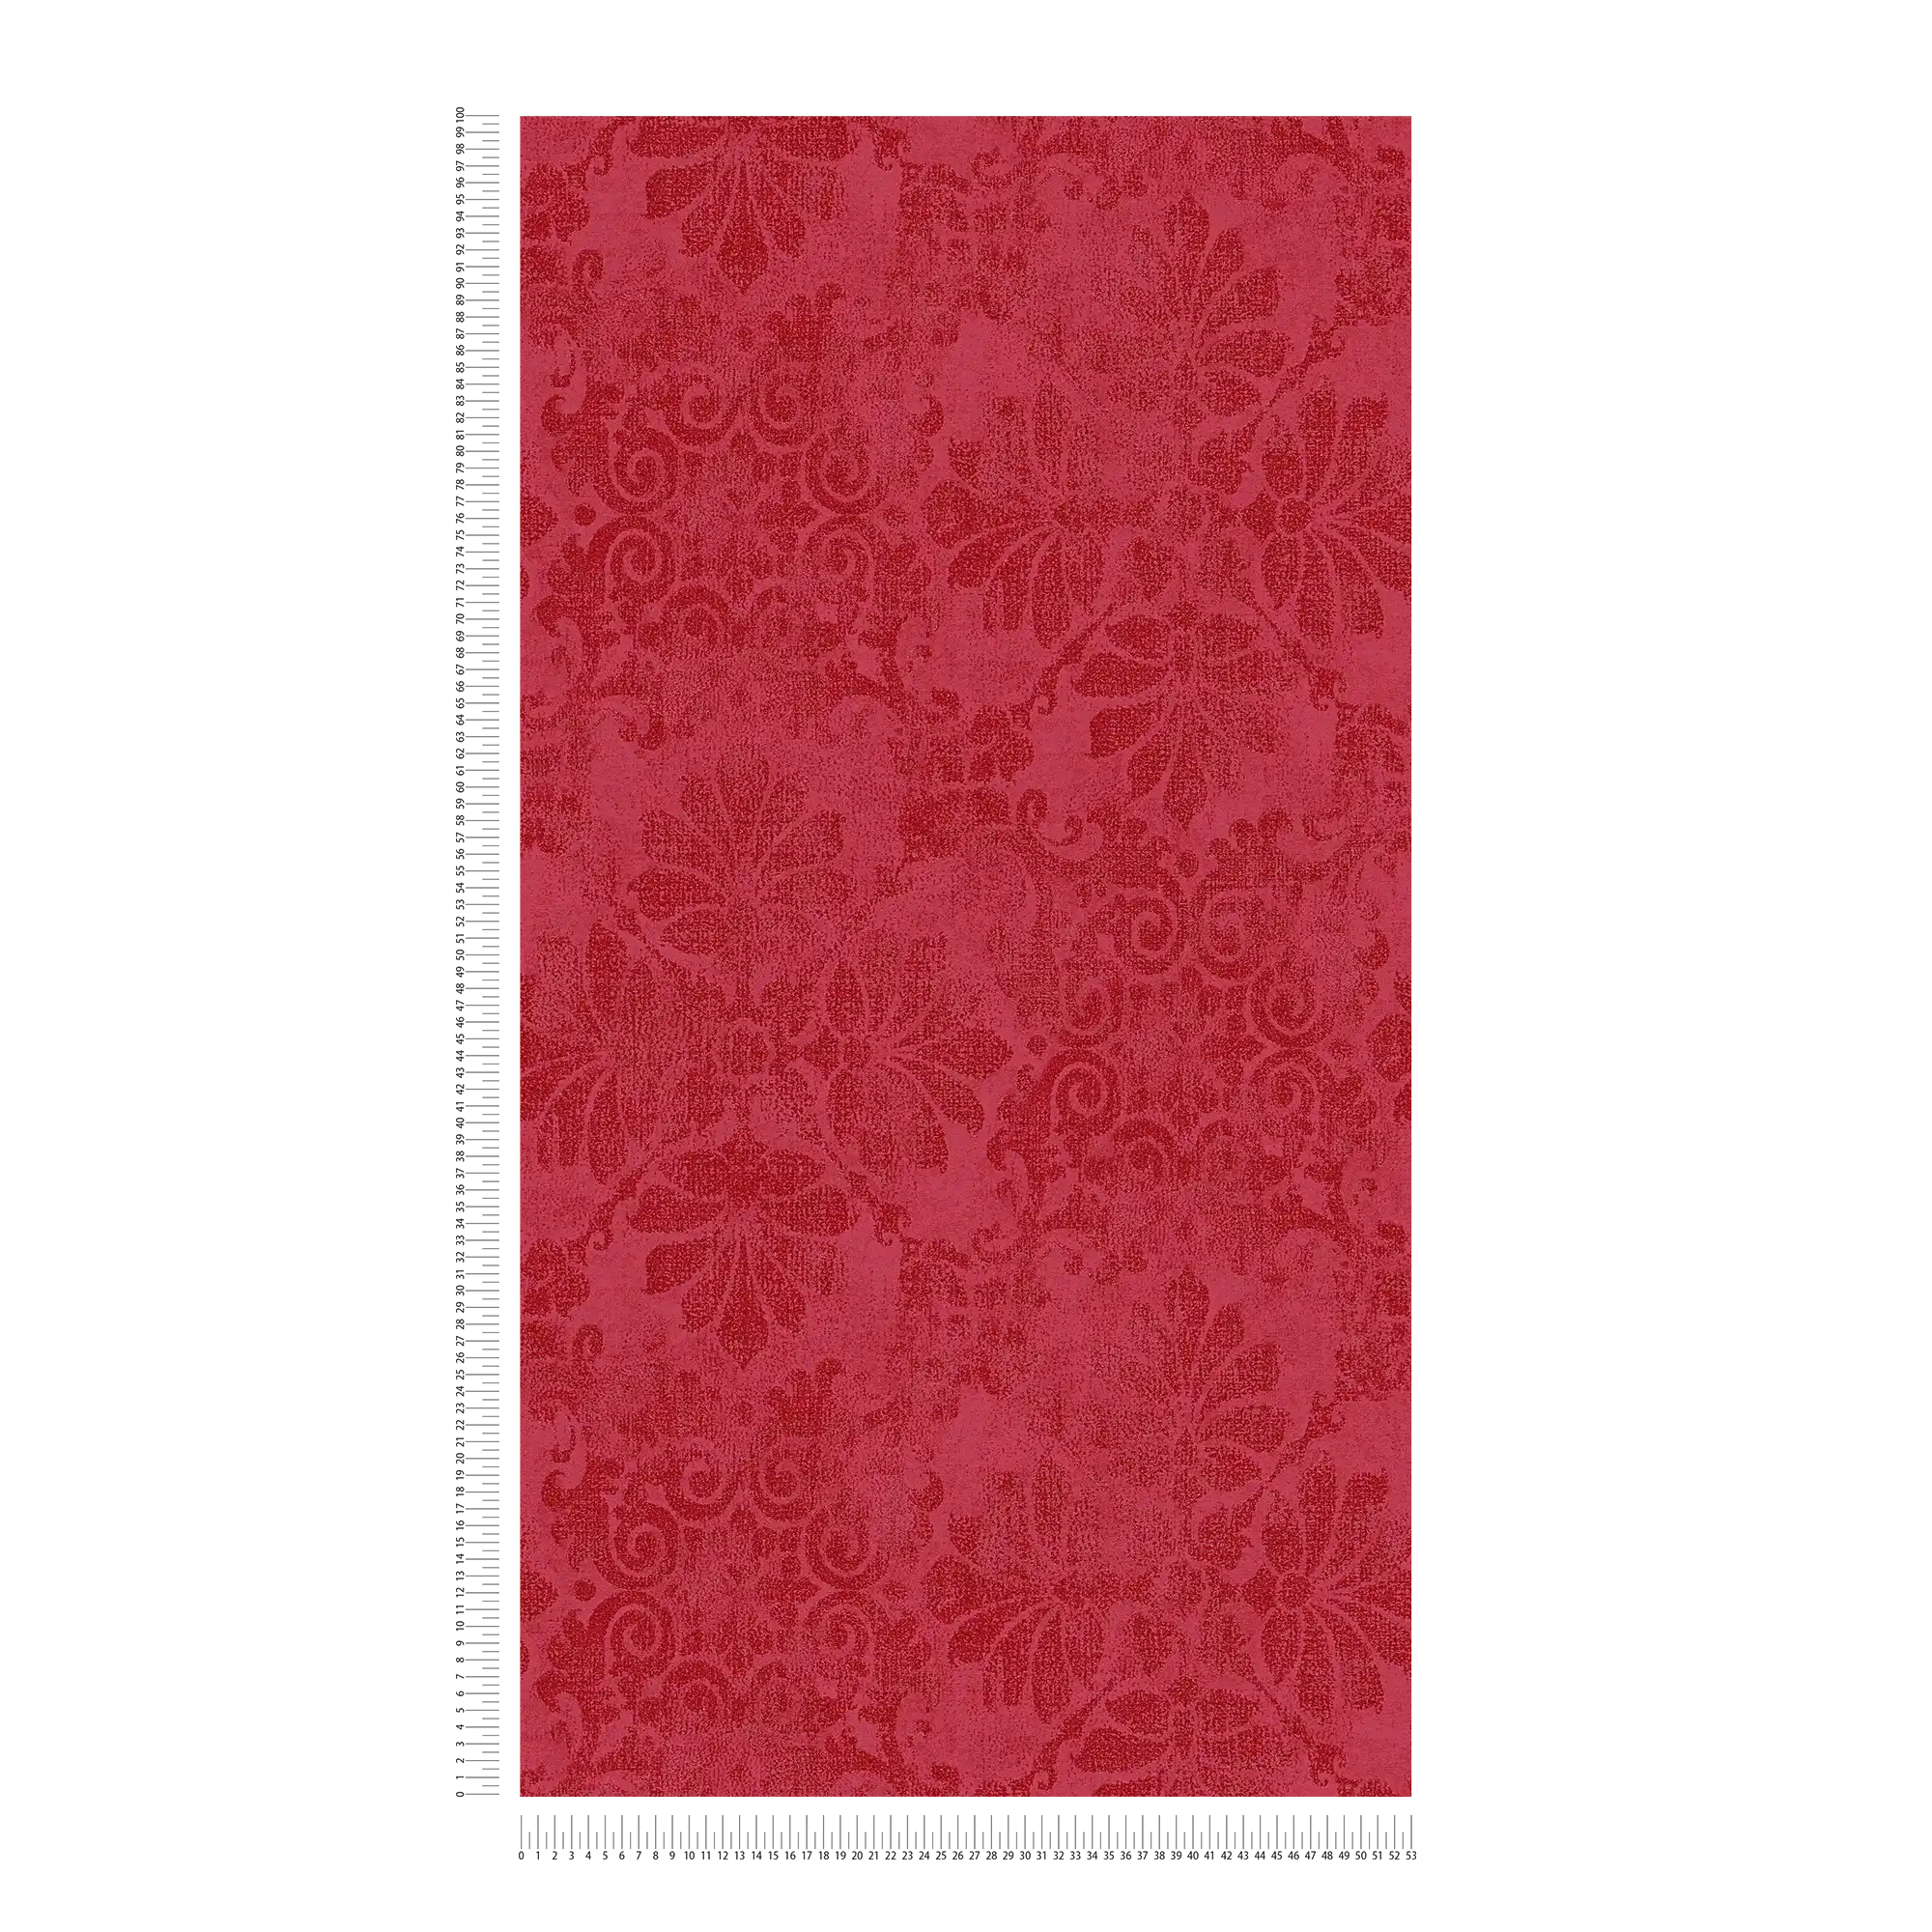             Pattern wallpaper with floral ornaments in vintage look - red, metallic
        